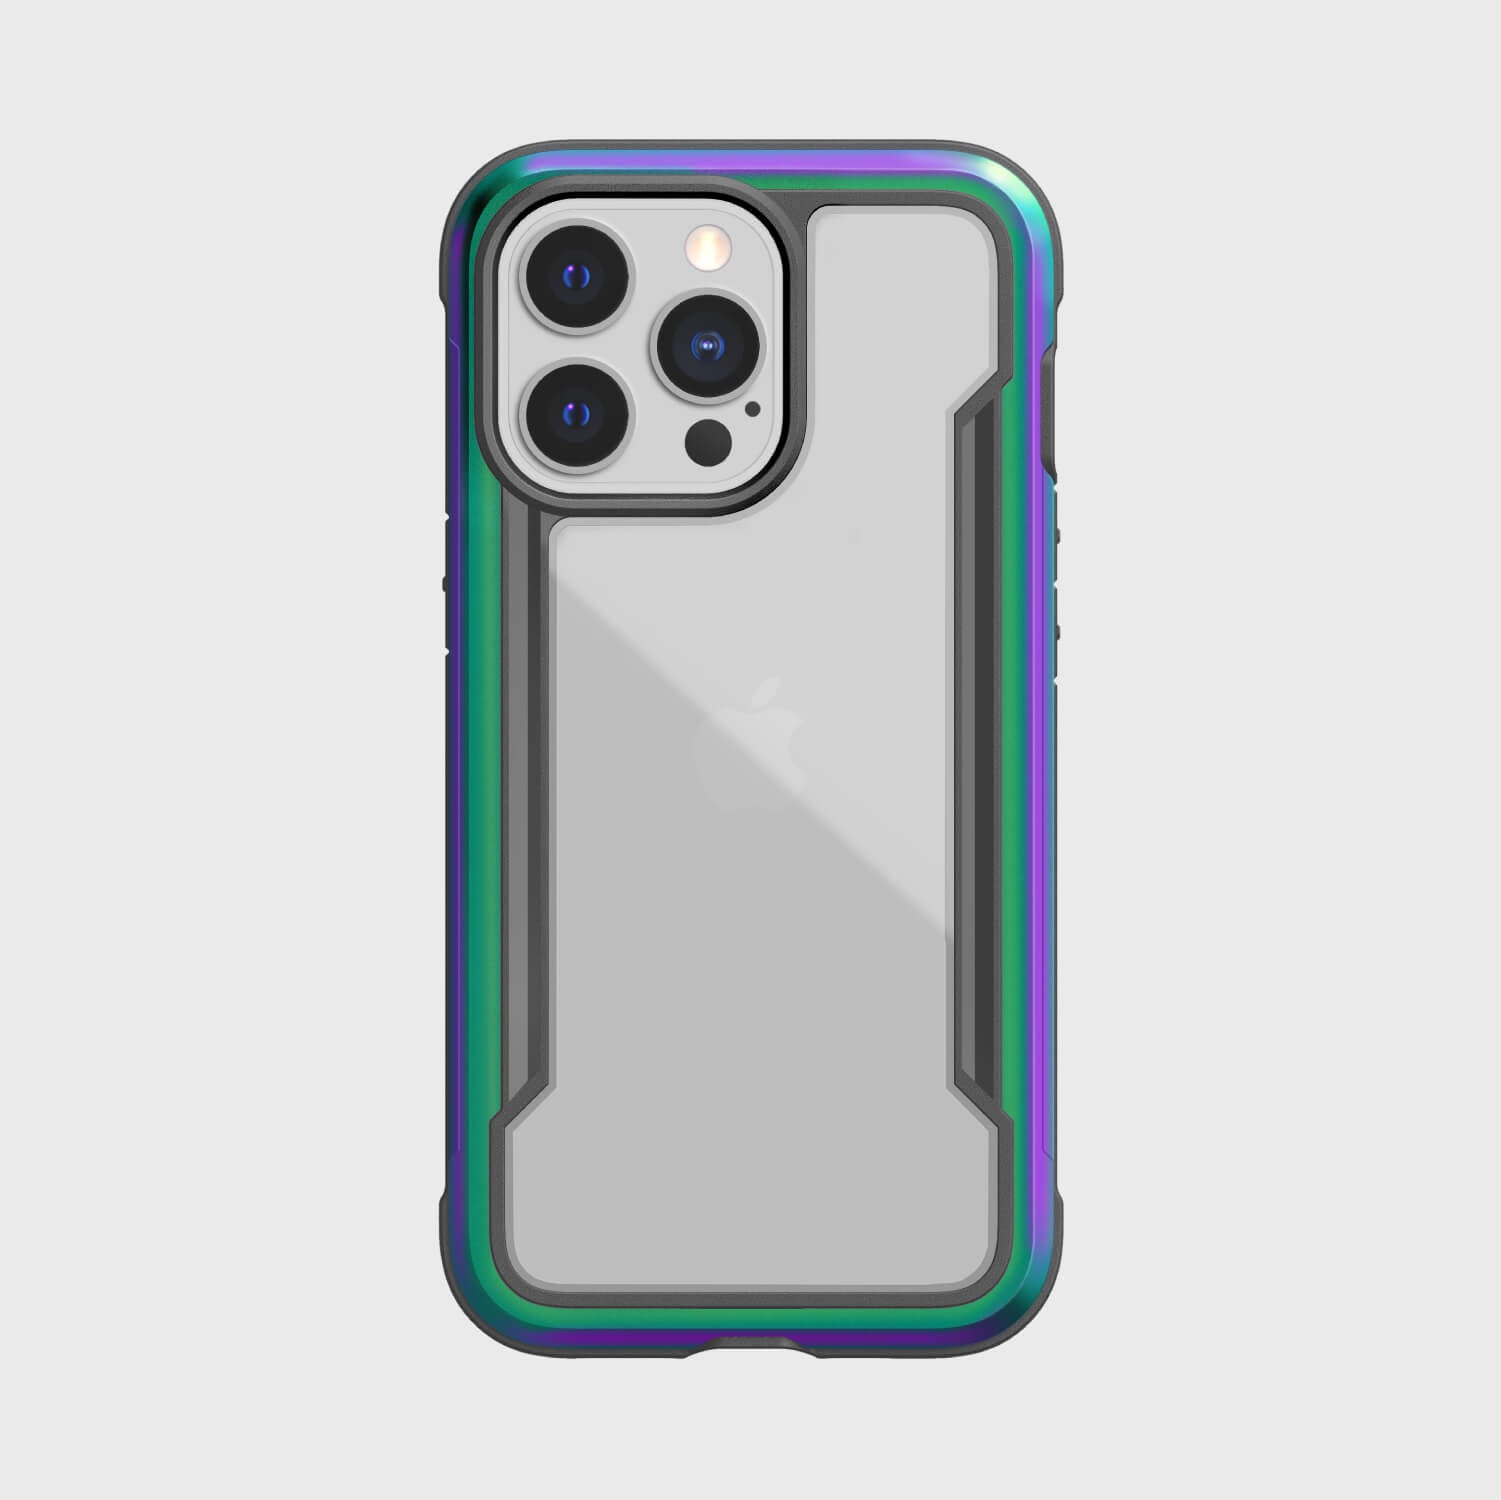 The Raptic SHIELD PRO iPhone 13 Pro case showcases a vibrant purple and green color scheme, offering superior 13-foot drop protection.